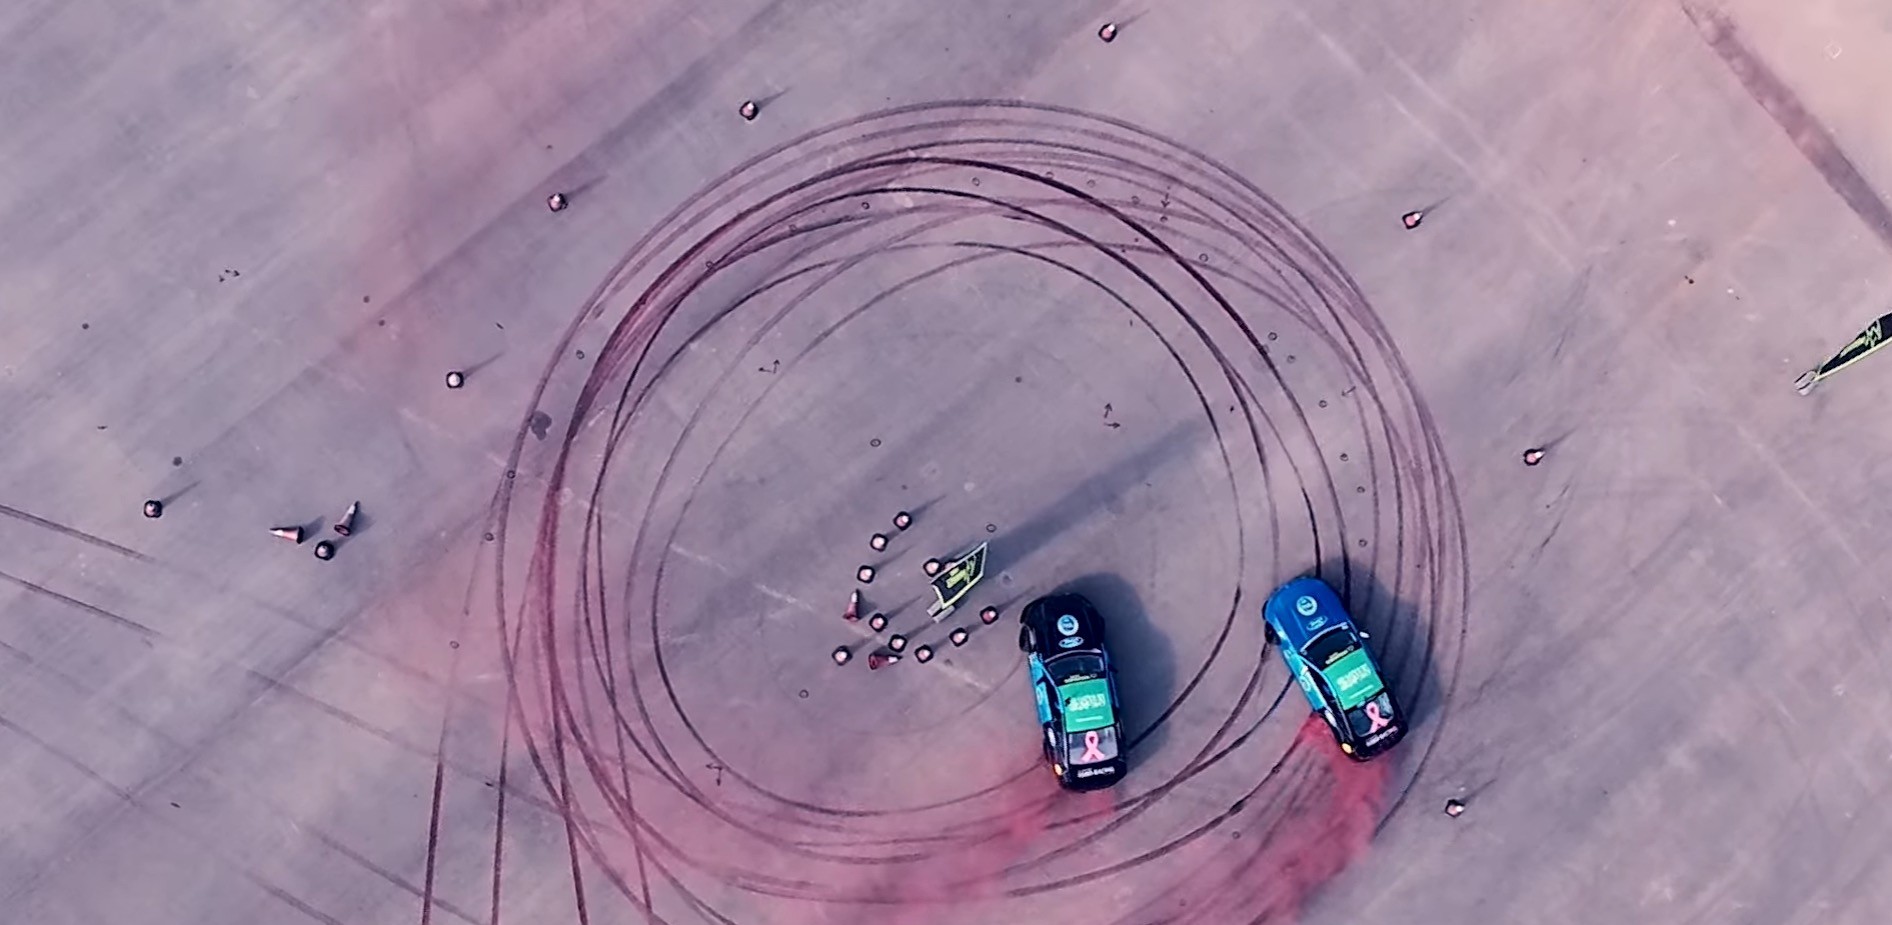 World S Largest Tire Mark Was Made For Breast Cancer